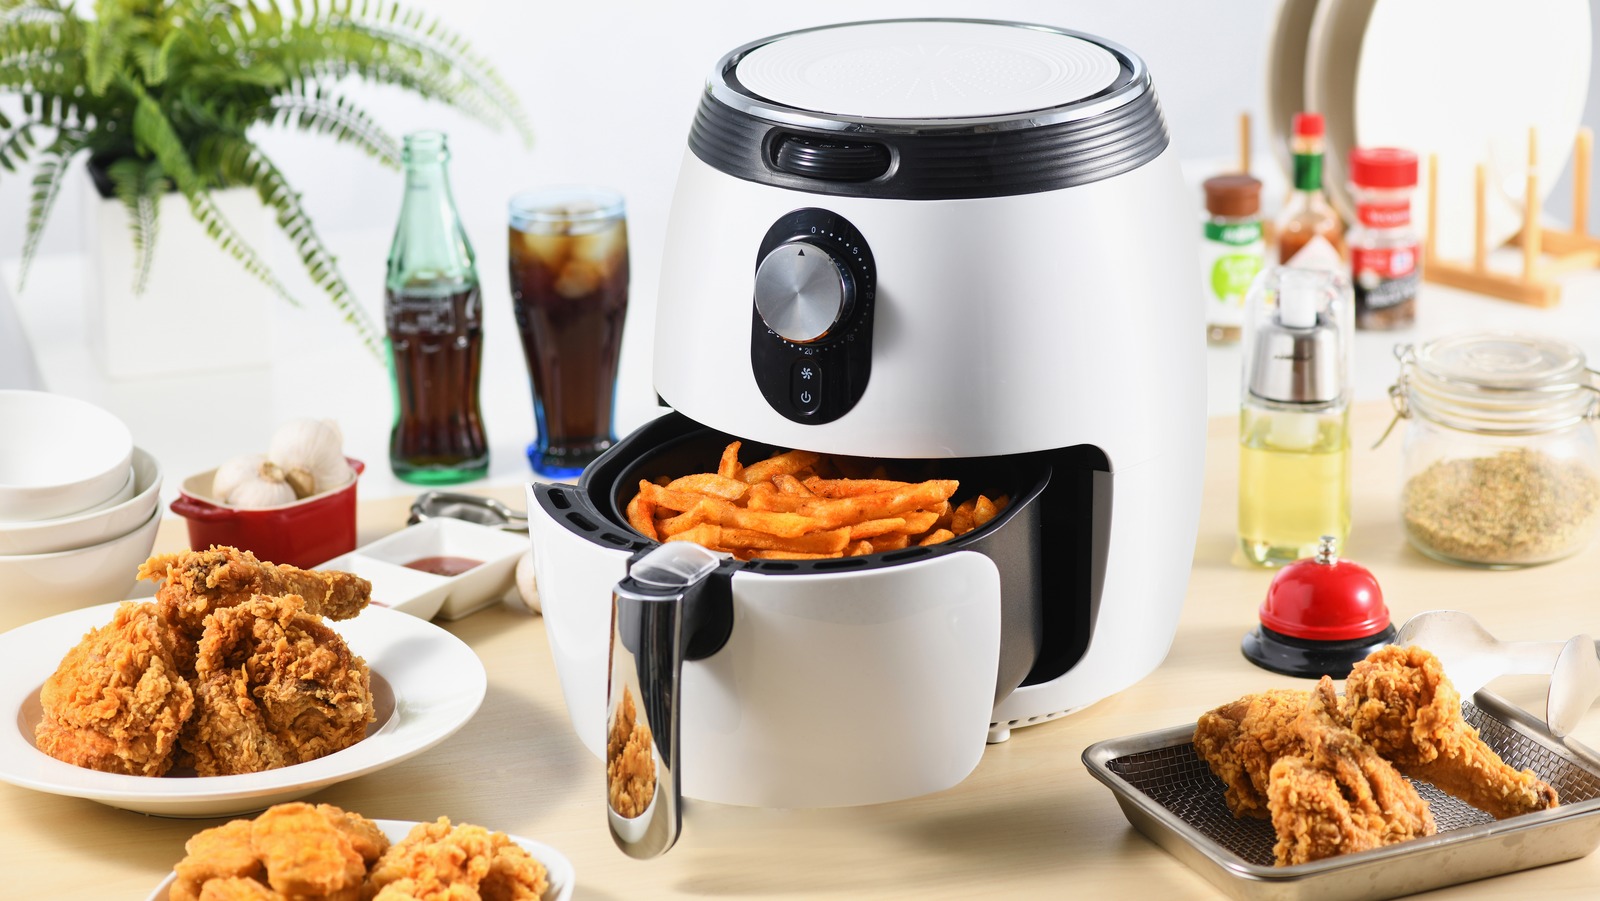 https://www.thedailymeal.com/img/gallery/how-food-companies-are-capitalizing-on-the-trendiness-of-air-fryers/l-intro-1678125675.jpg